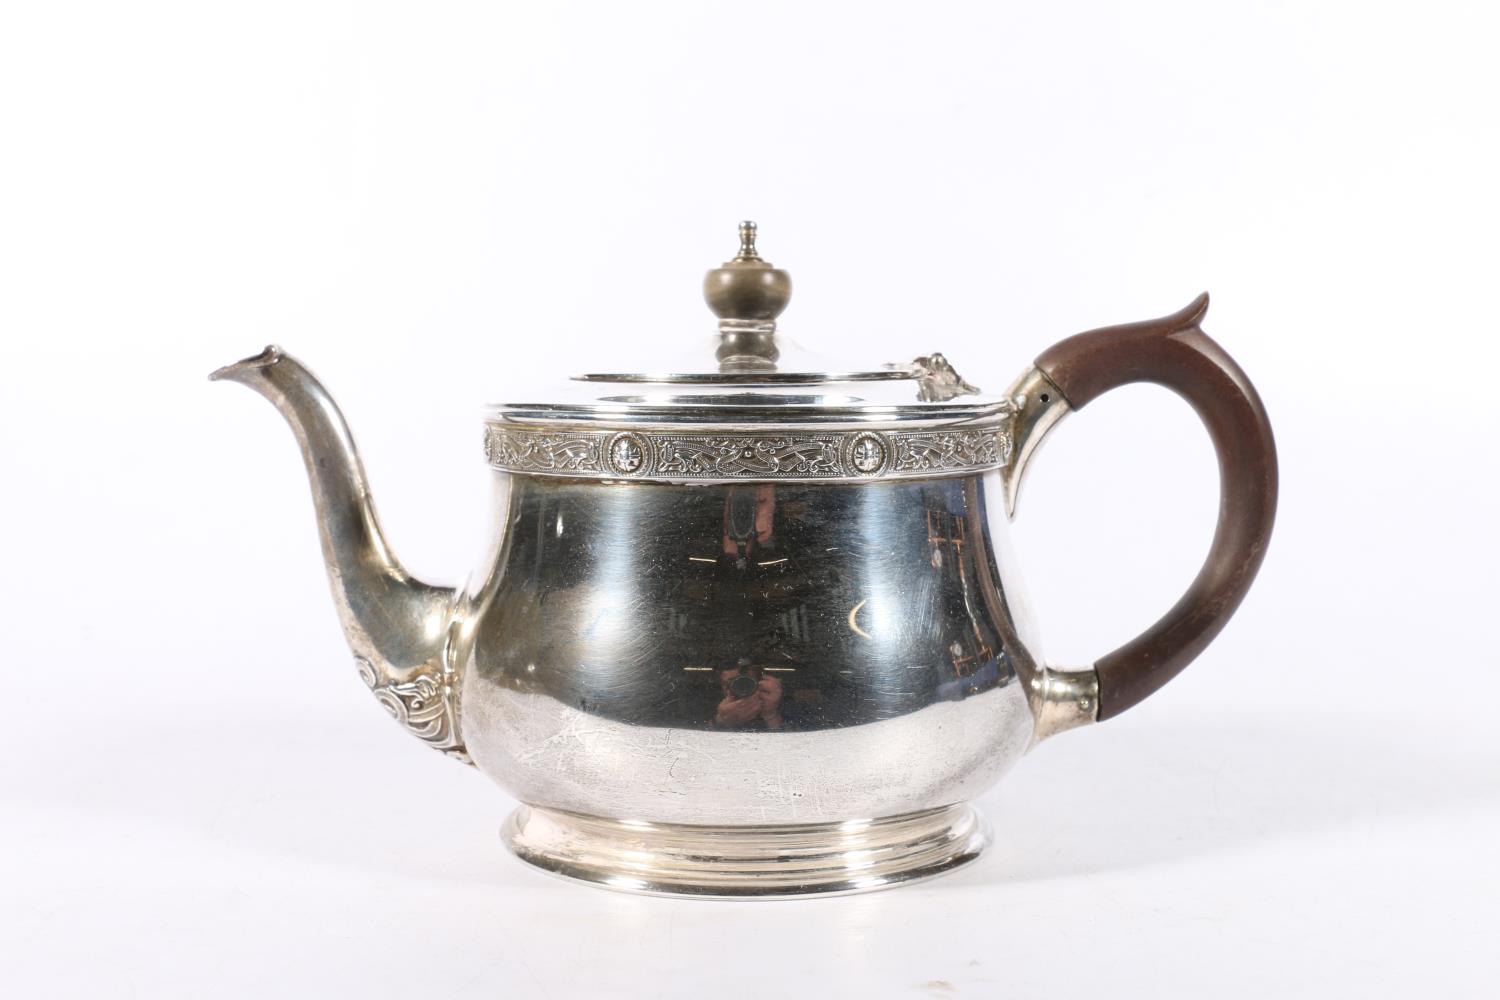 Elizabeth II silver teapot with Celtic band to the rim by Wakely & Wheeler, London, 1956, 734g